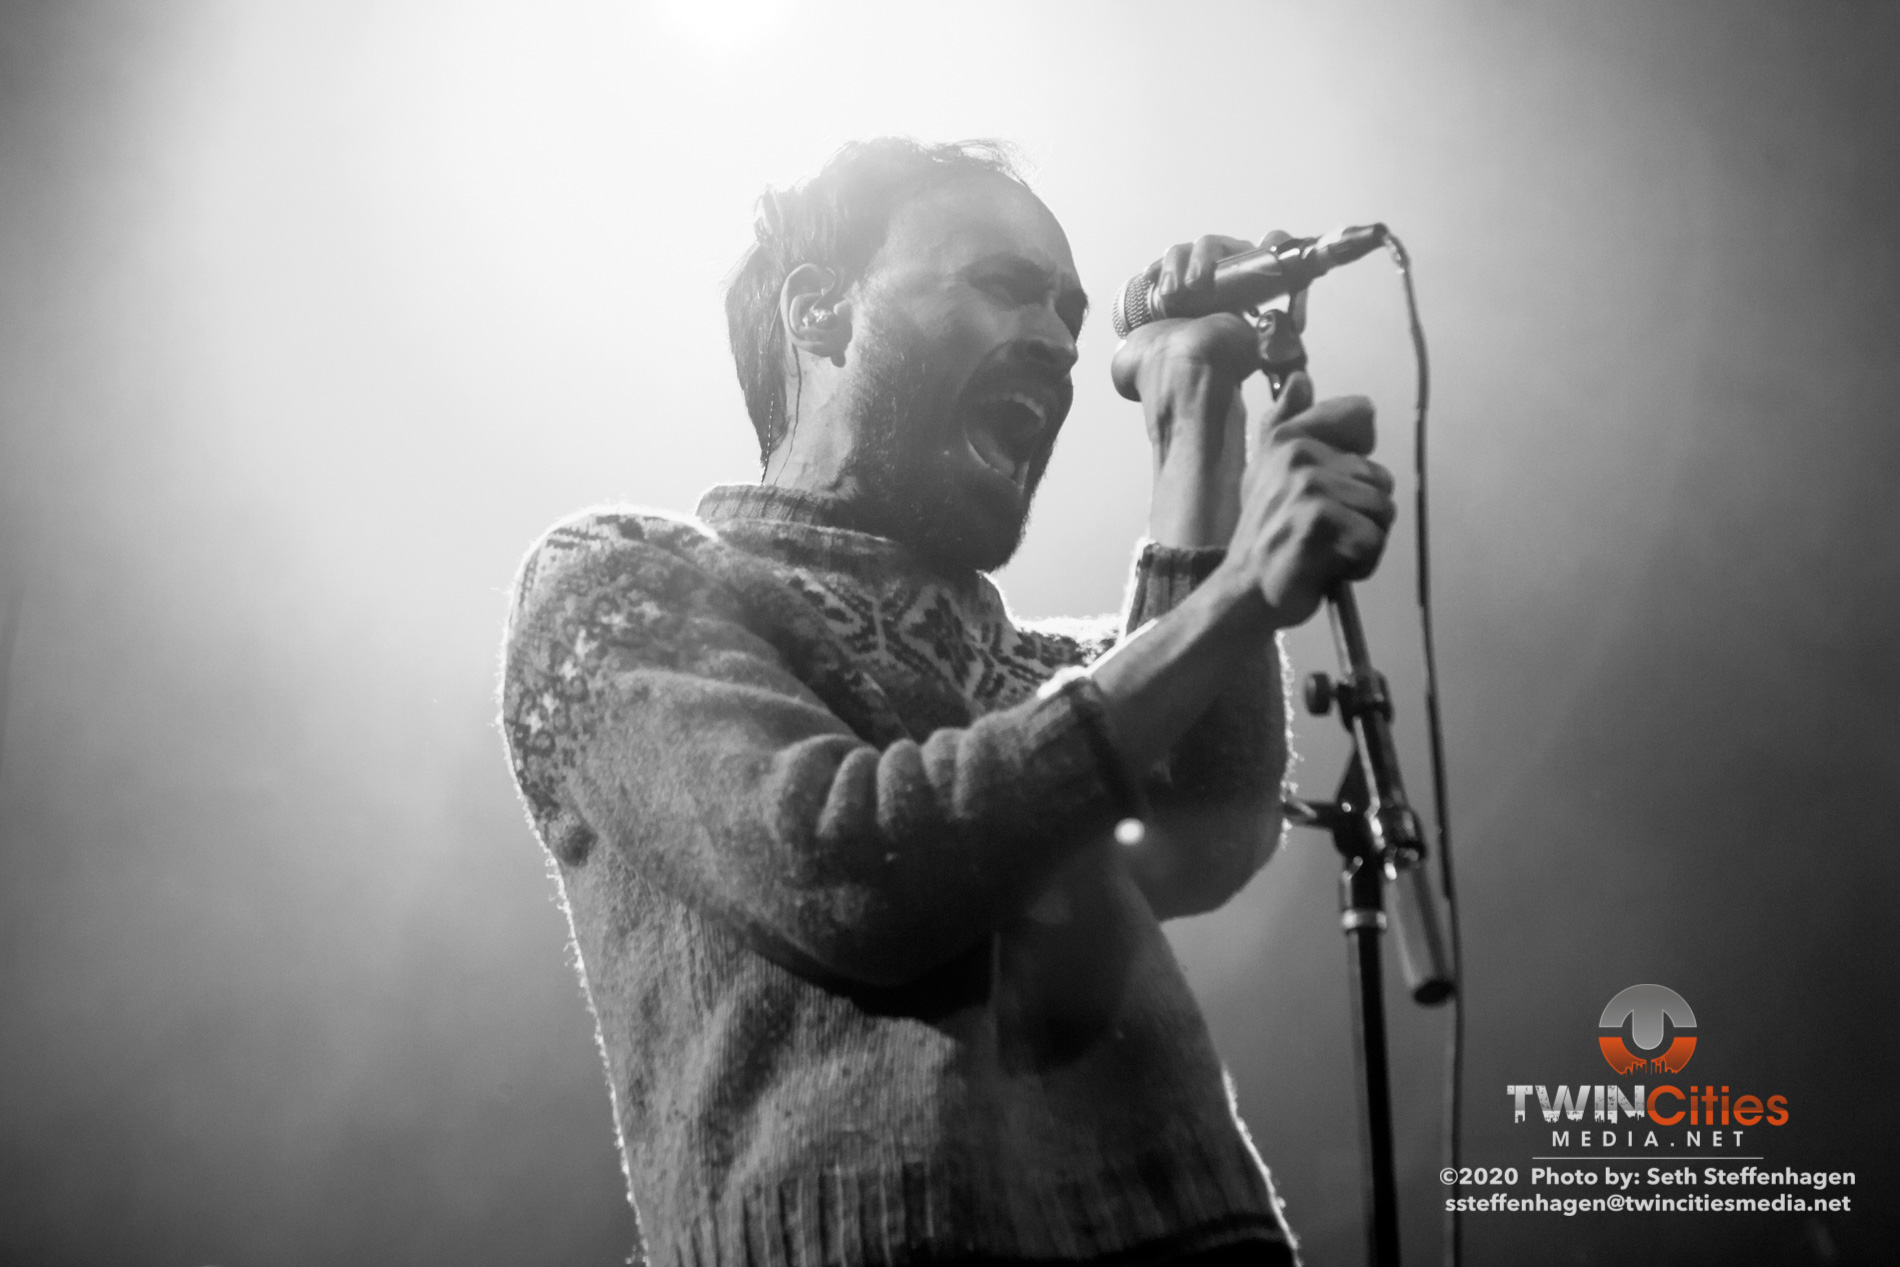 January 30, 2020 - Minneapolis, Minnesota, United States -  mewithoutYou live in concert at First Avenue opening for Thrice.

(Photo by Seth Steffenhagen/Steffenhagen Photography)